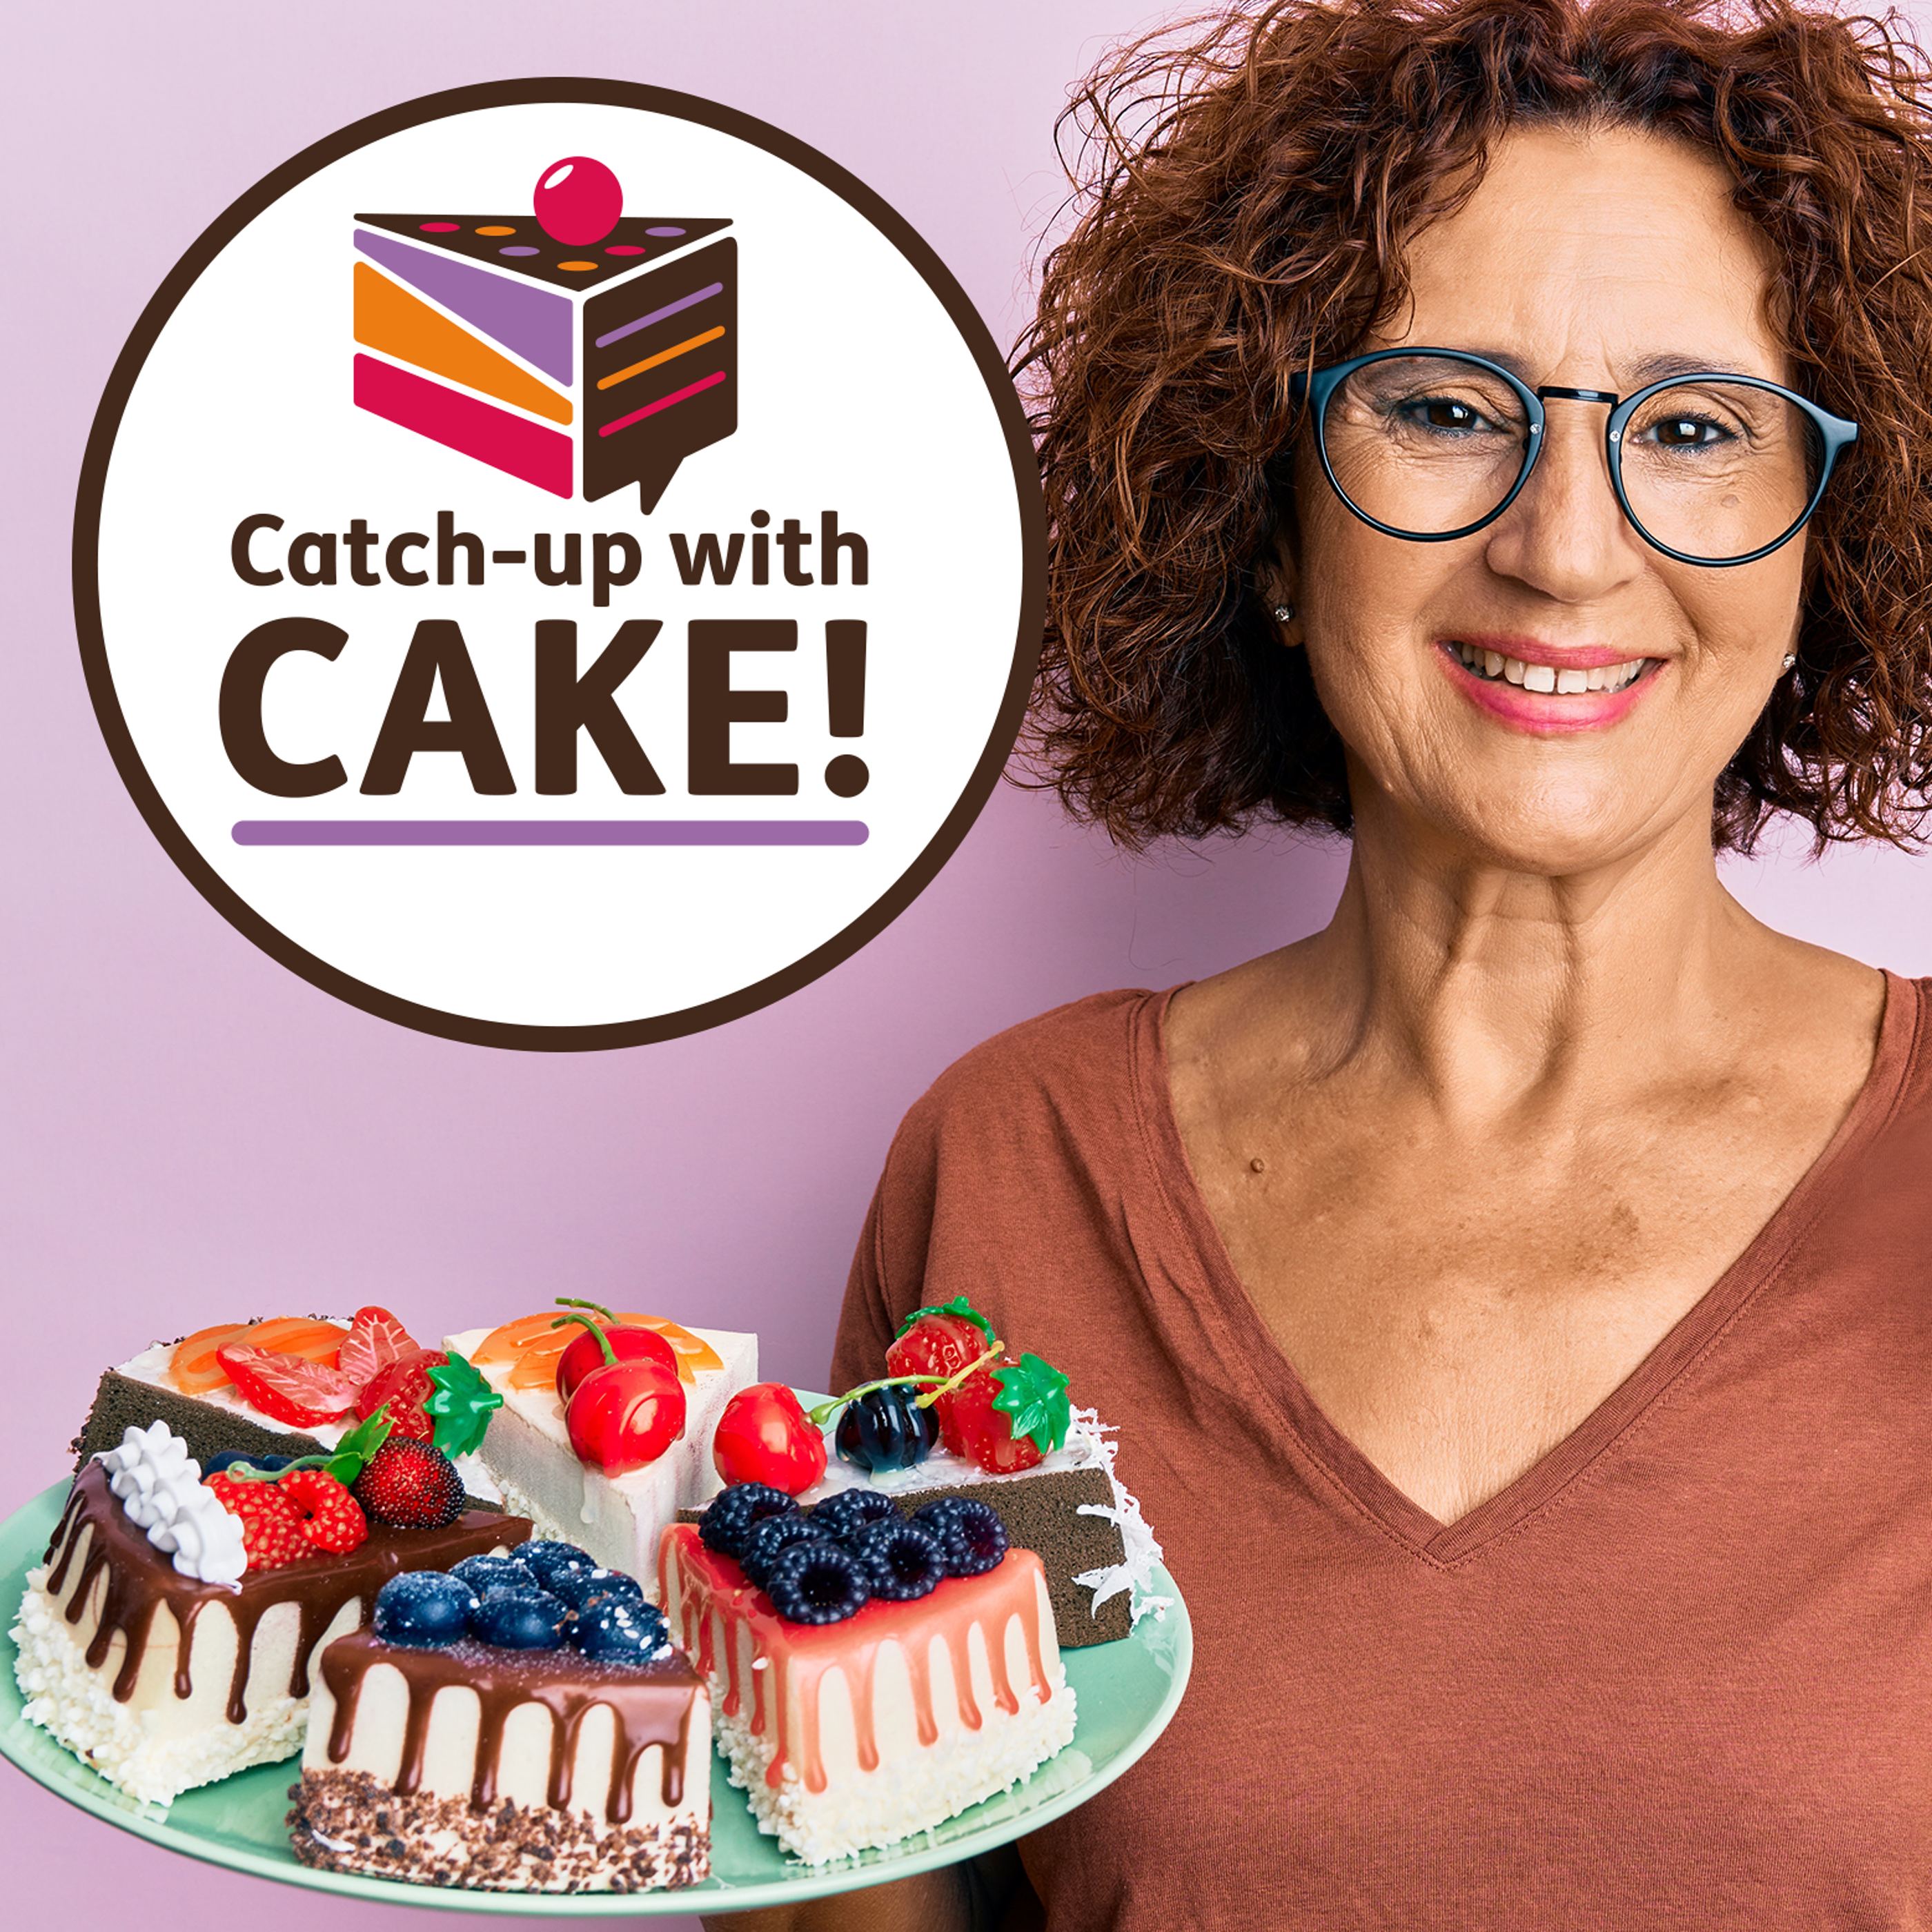 Catch up with Cake! woman holding a blue plate of assorted cake slices with a pink backdrop